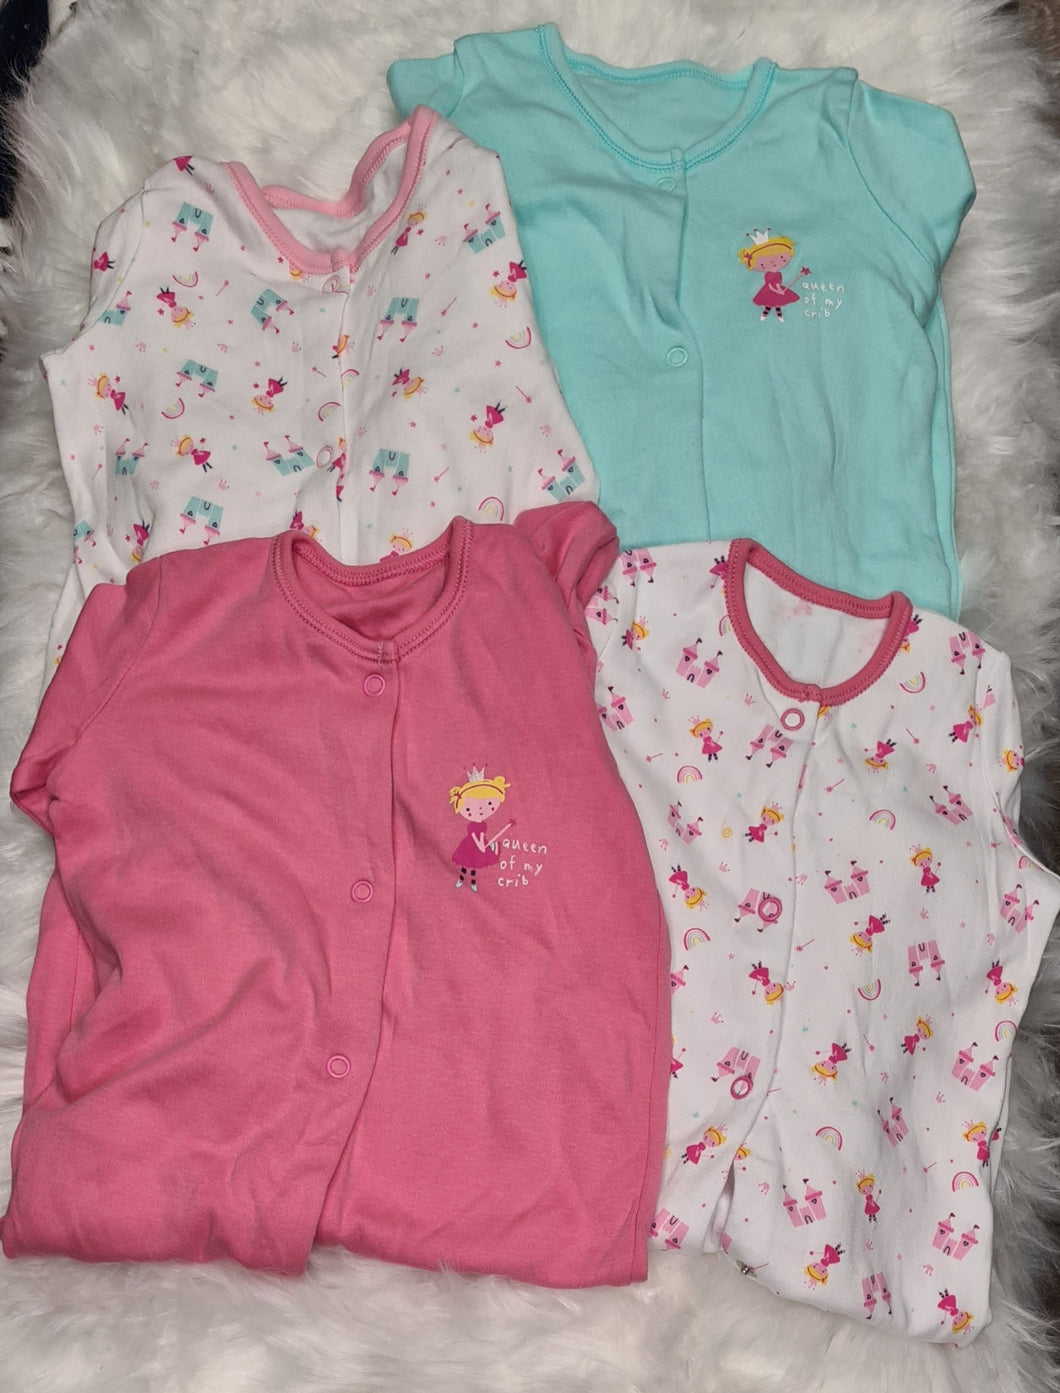 Girls 6-9 months - Pack of 4 Baby Grows